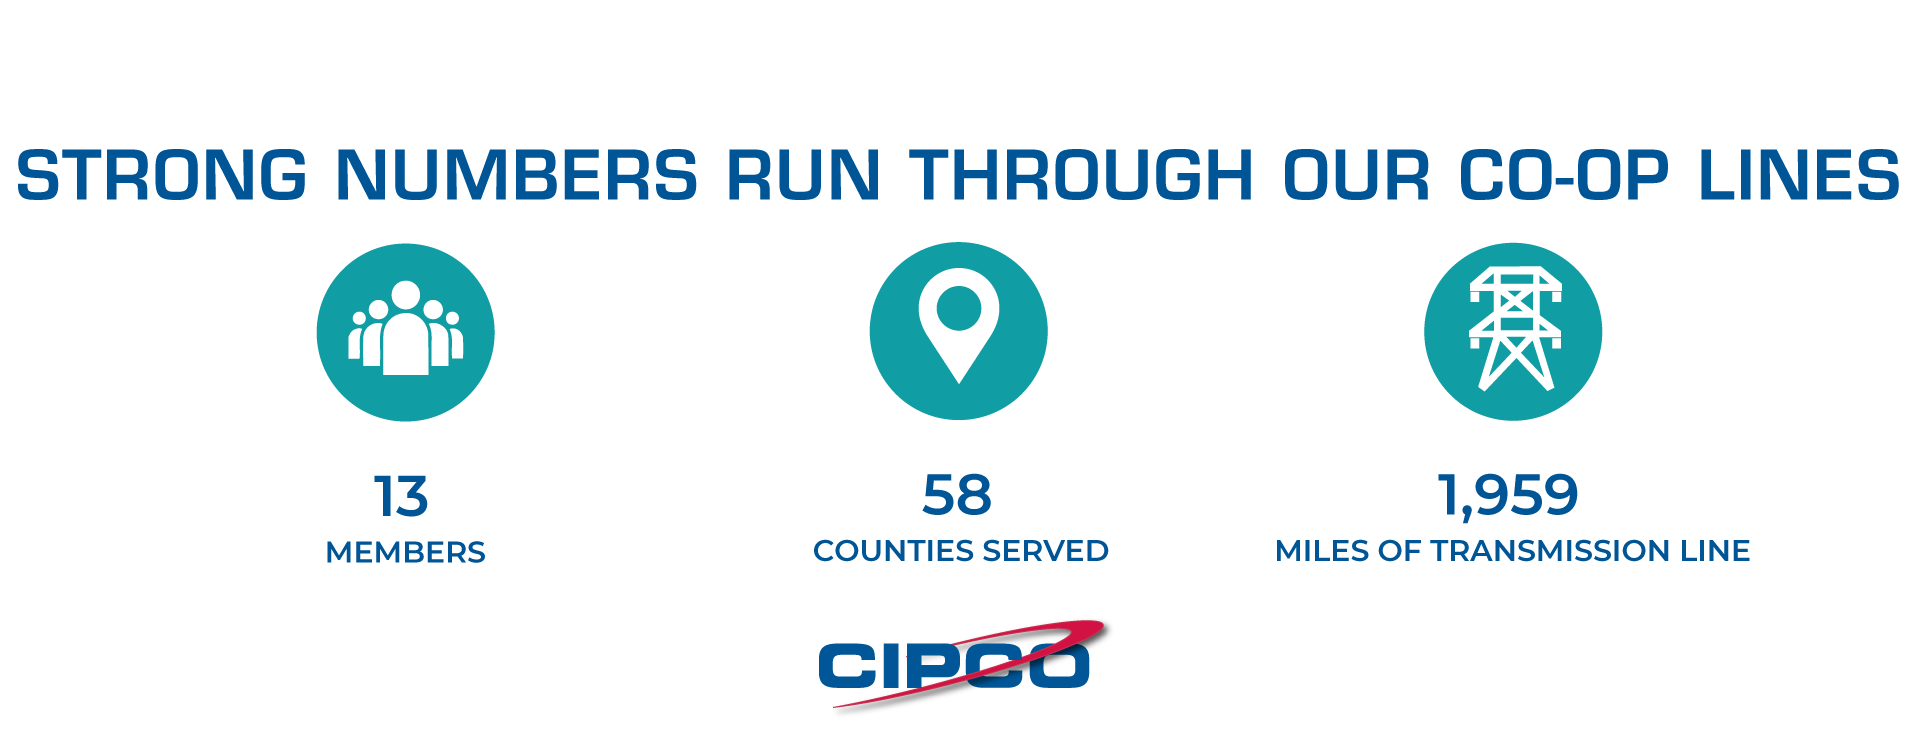 CIPCO Facts - 13 members 58 counties served and 1959 miles of transmission lines